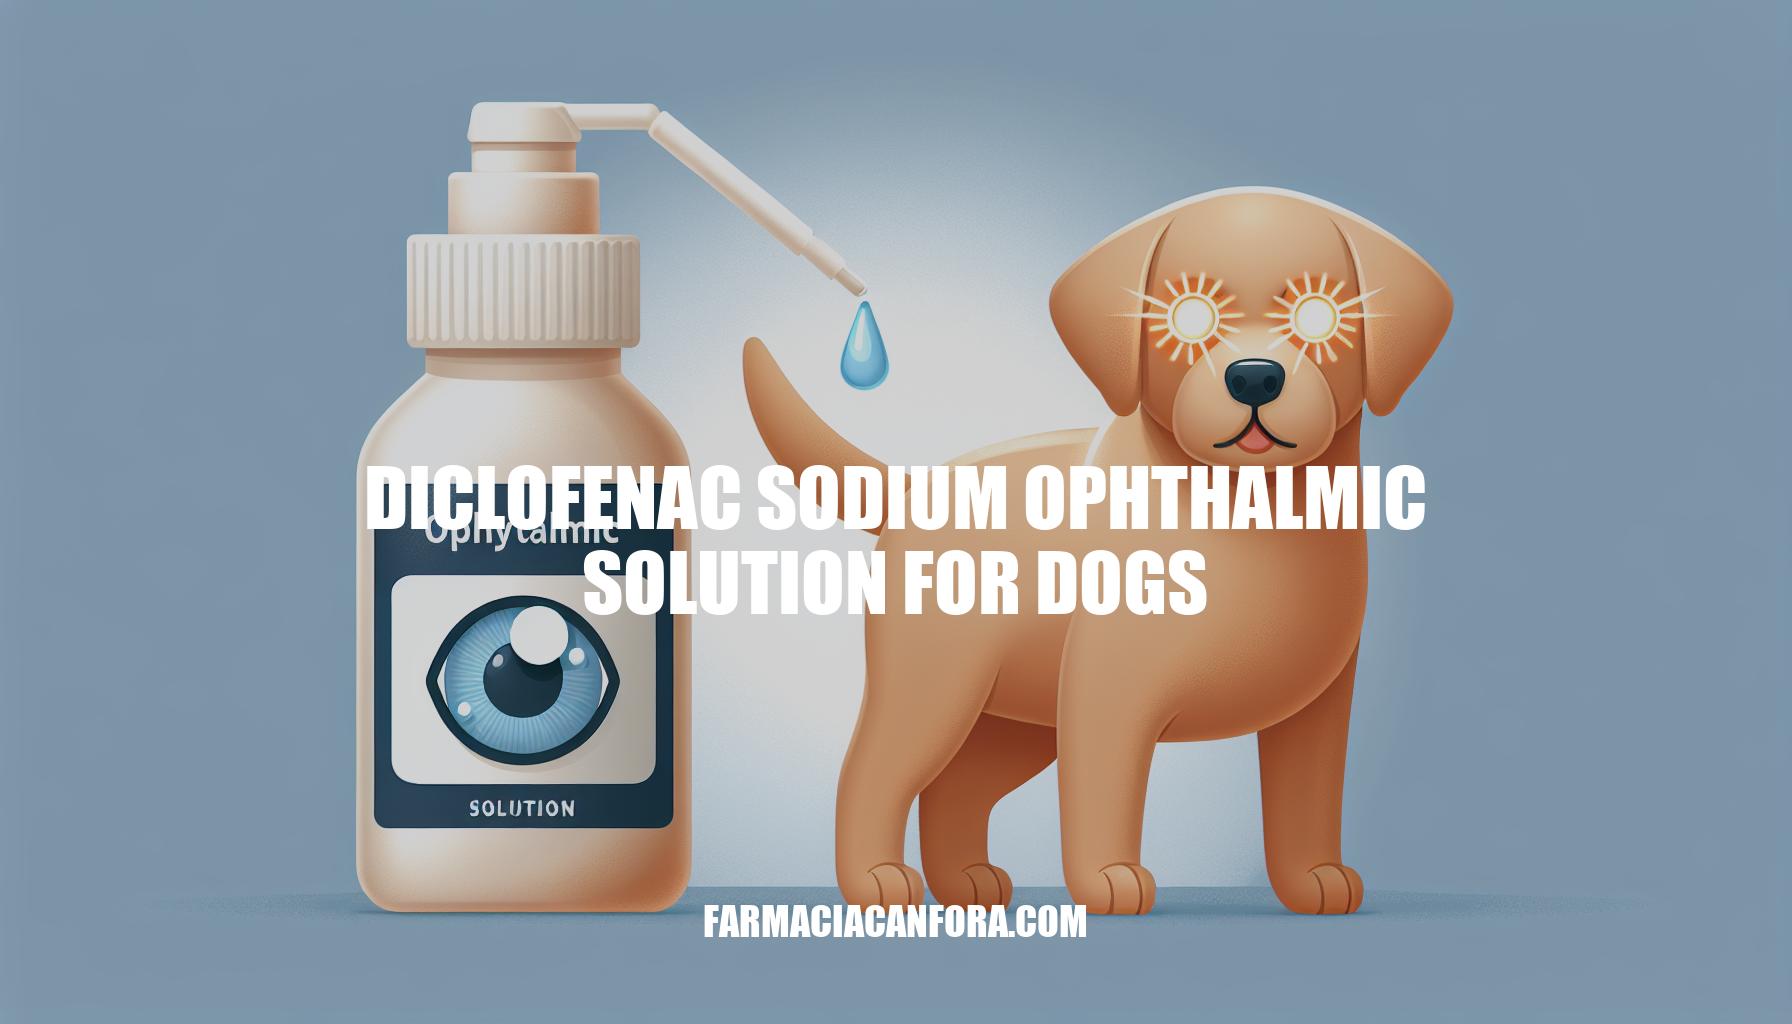 Diclofenac Sodium Ophthalmic Solution for Dogs: Benefits and Usage Guide